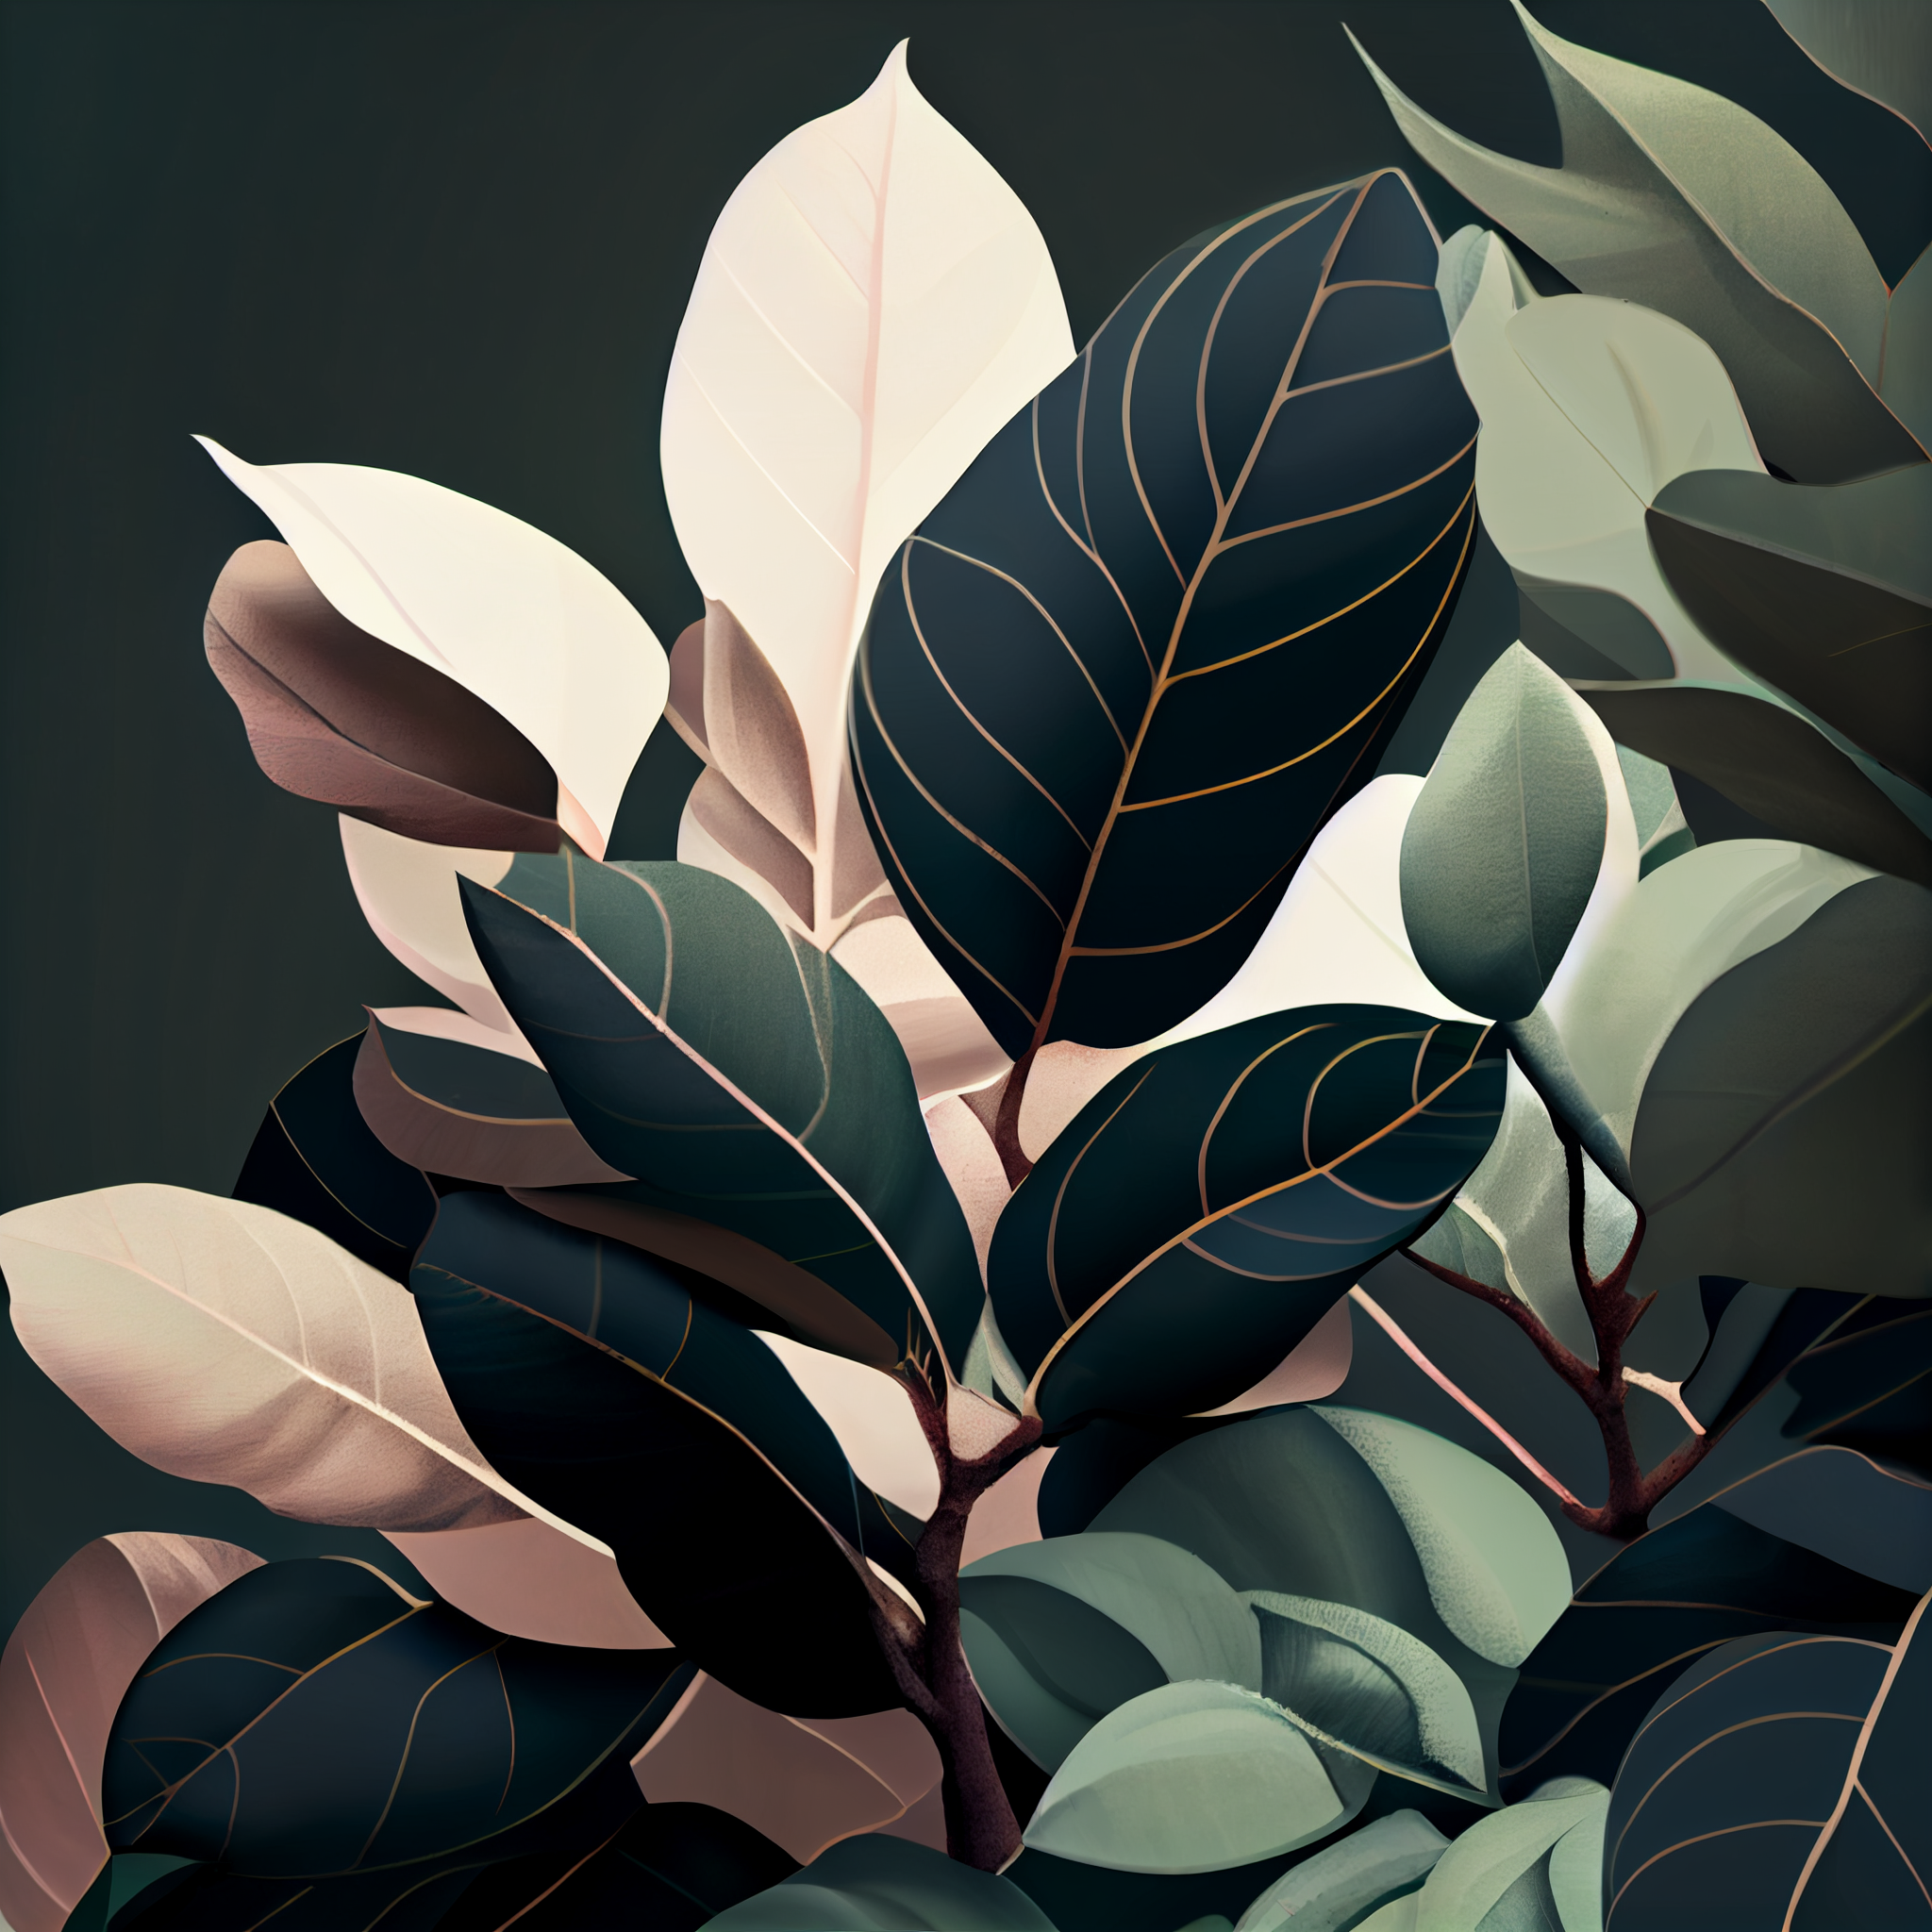 Bring Nature Home with our Stunning Magnolia Leaves Graphic Painting Print